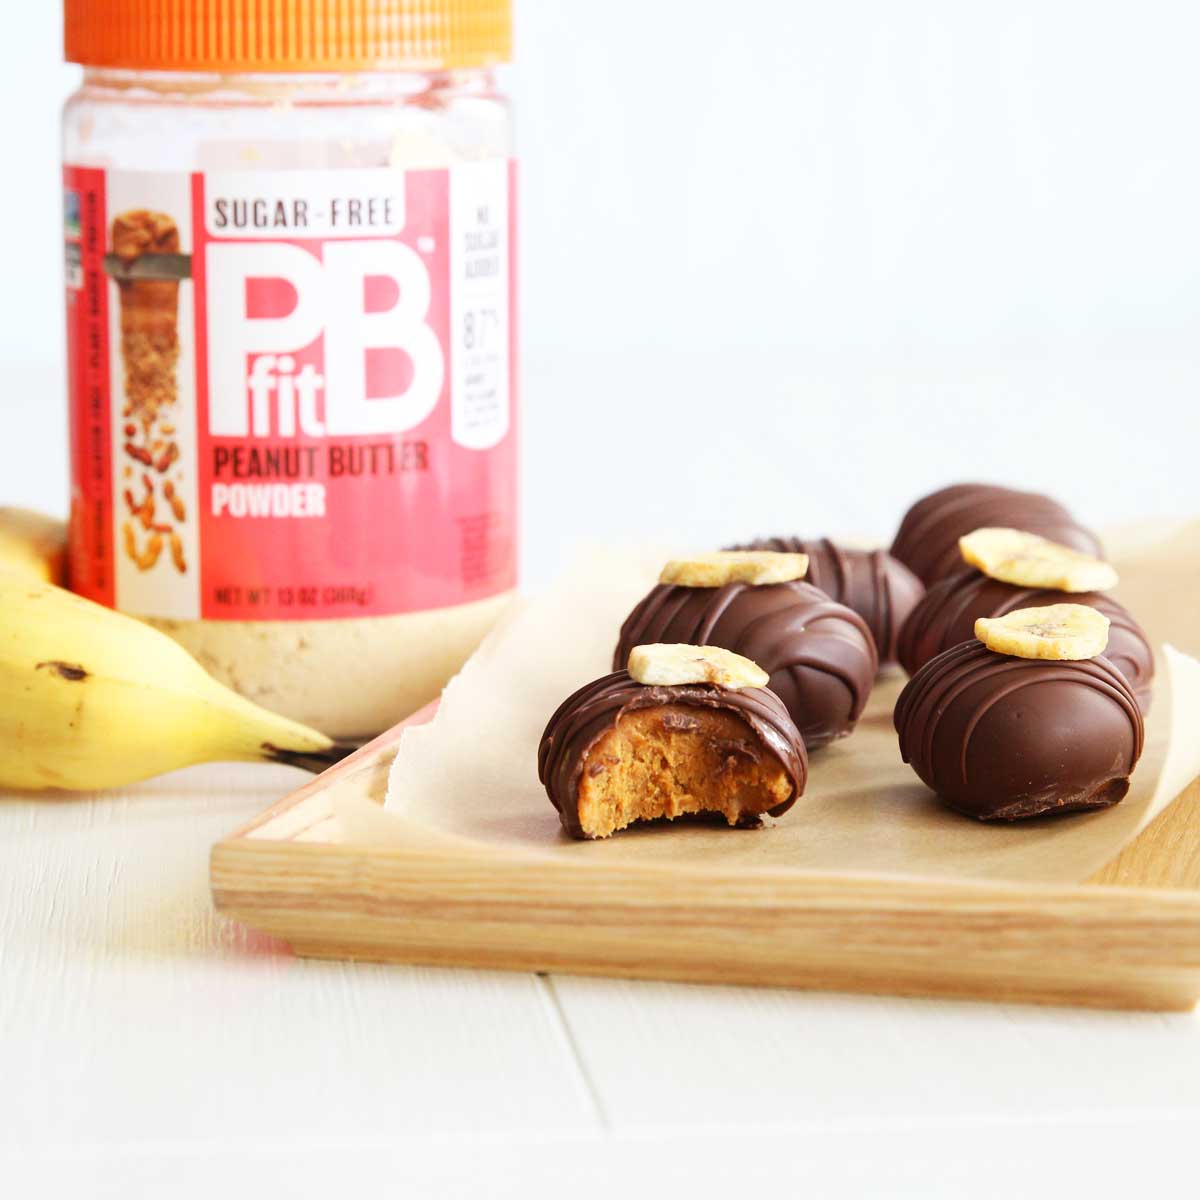 Easy & Delicious Banana Chocolate Easter Eggs Recipe with PB Fit - Only 3 Ingredients! - sweet potato mochi